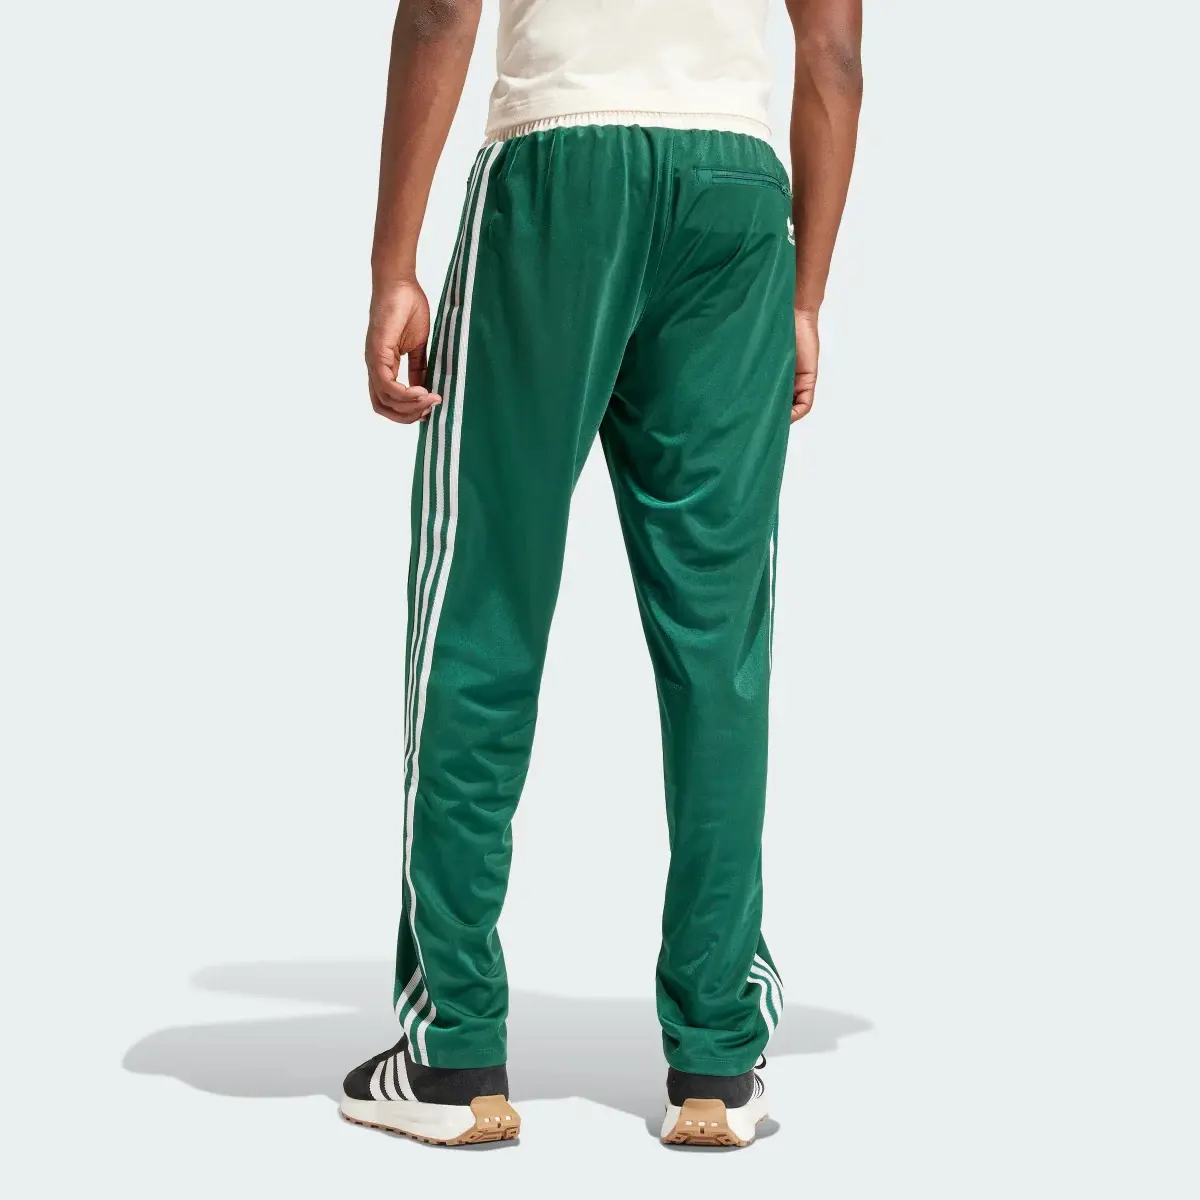 Adidas Track Tracksuit Bottoms. 3